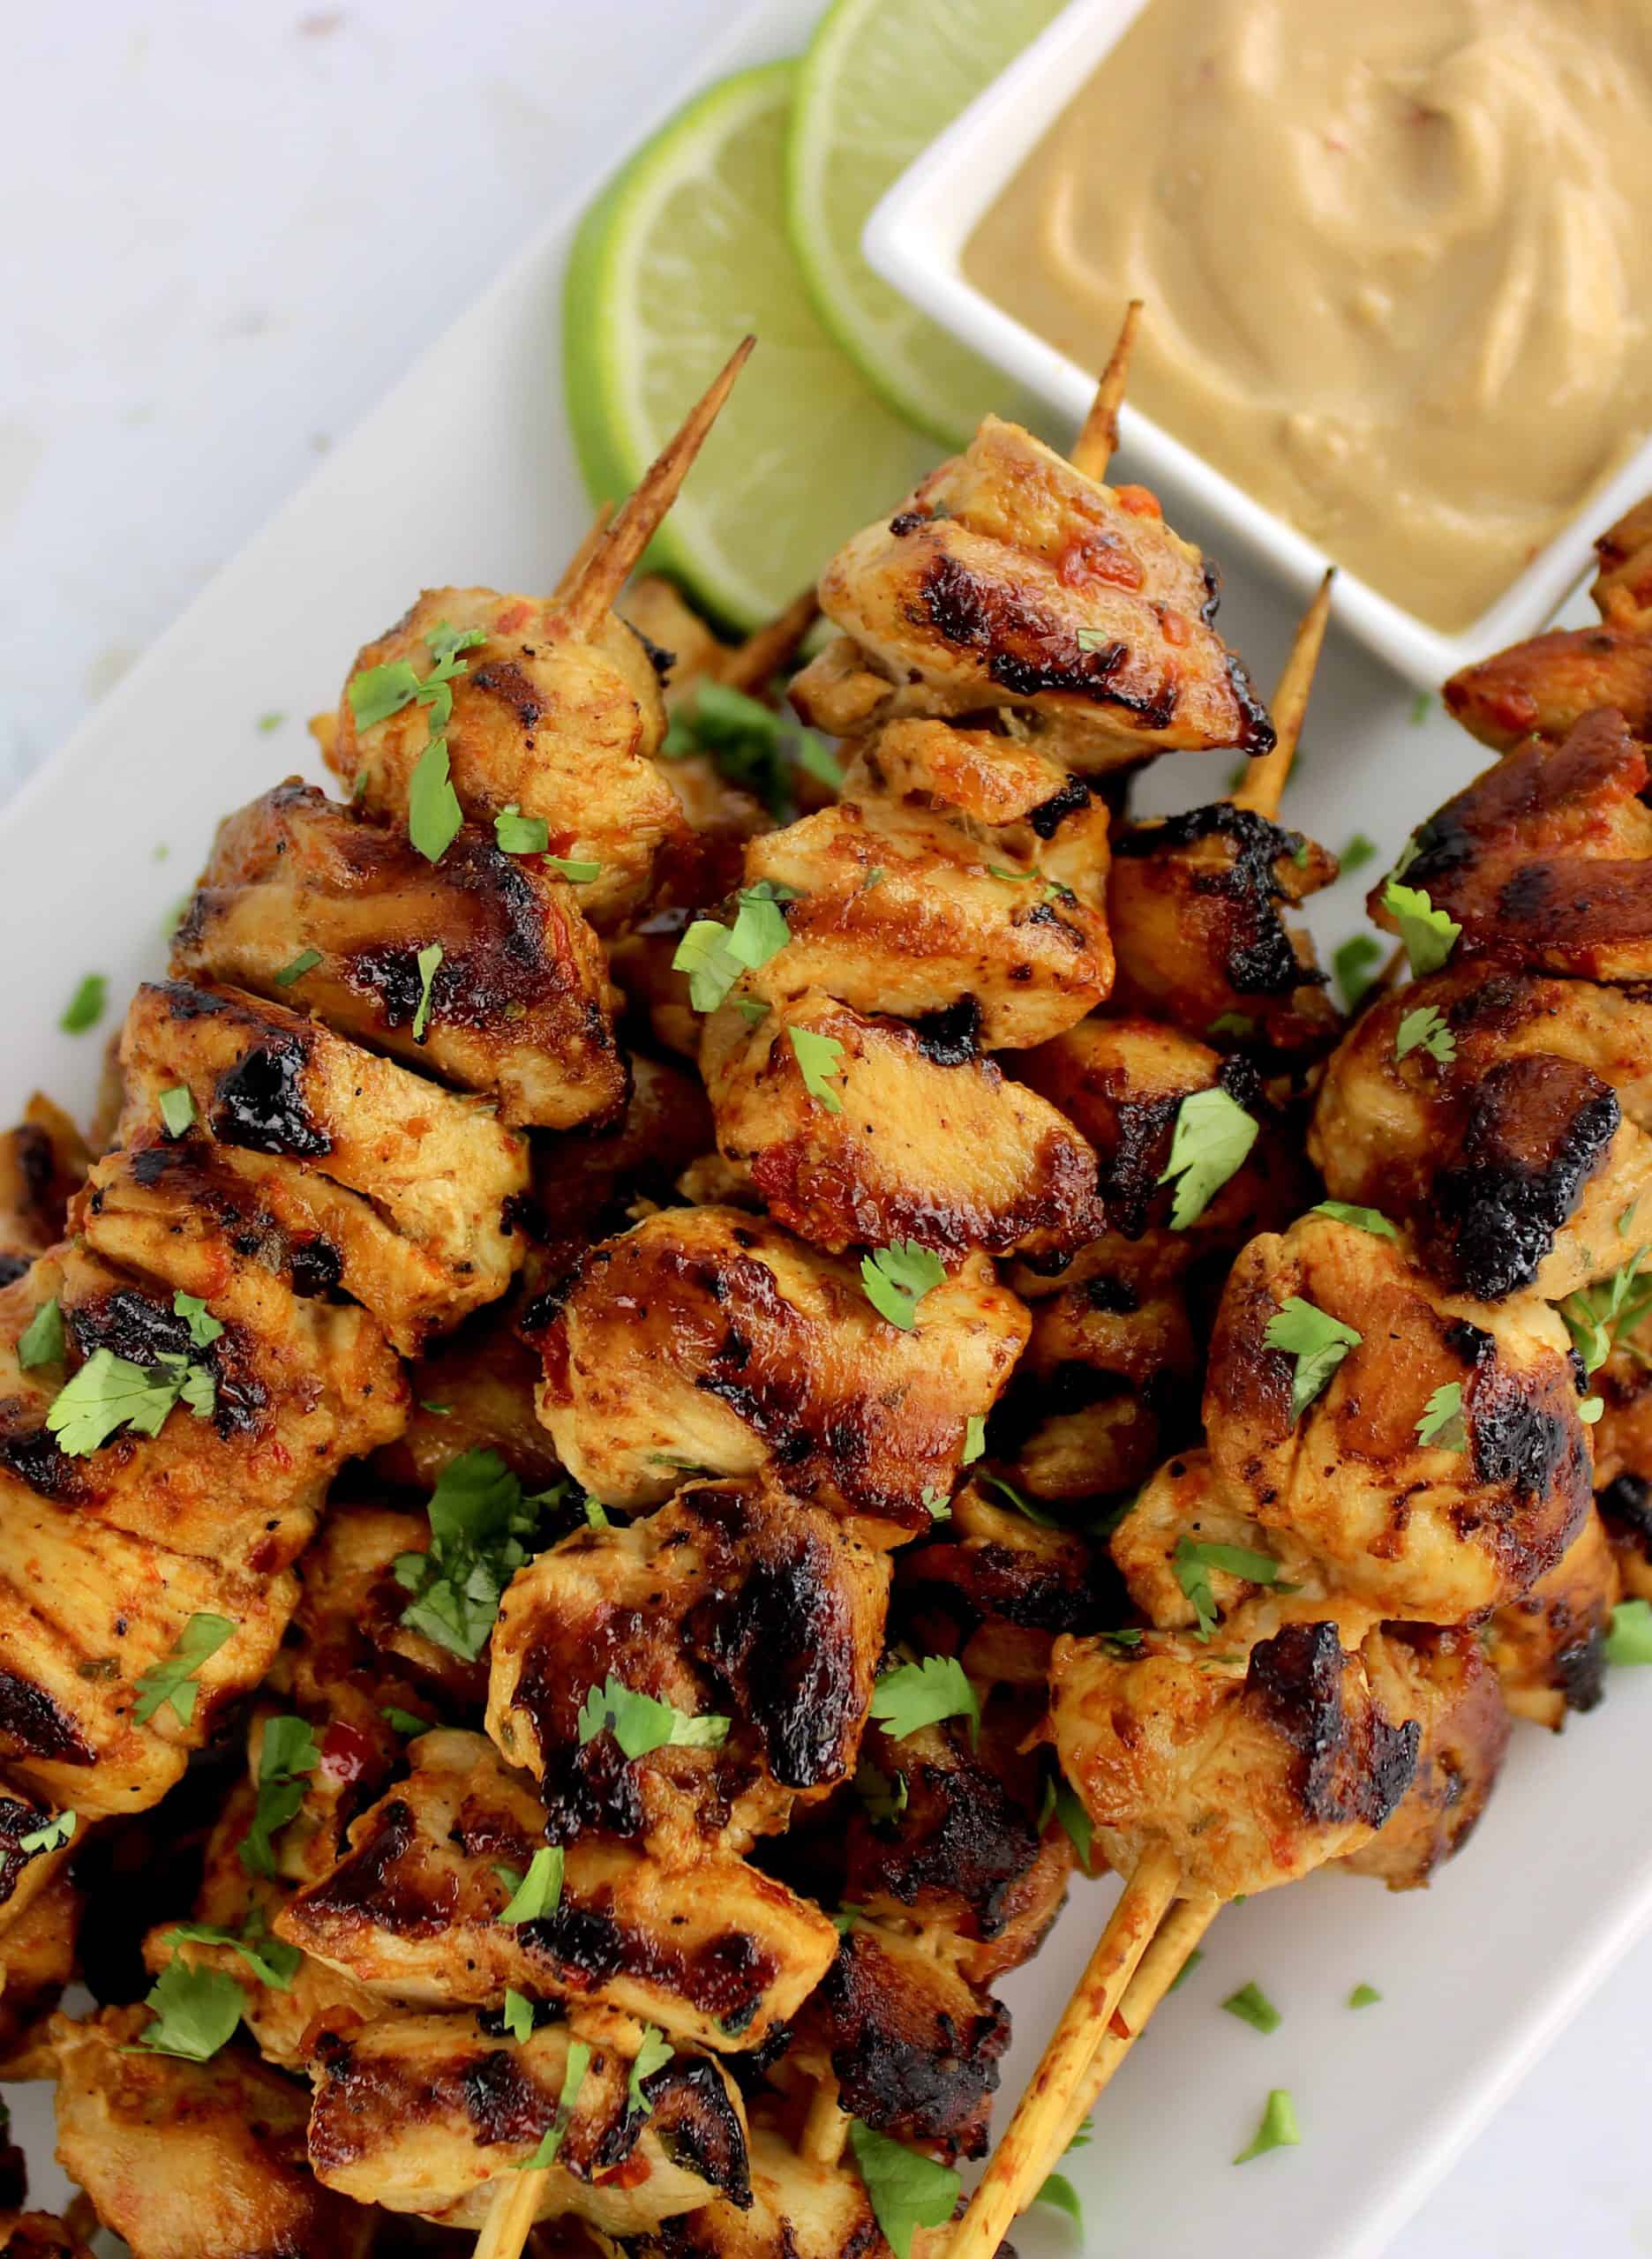 Thai Chicken Satay skewers on white plate with peanut sauce on side